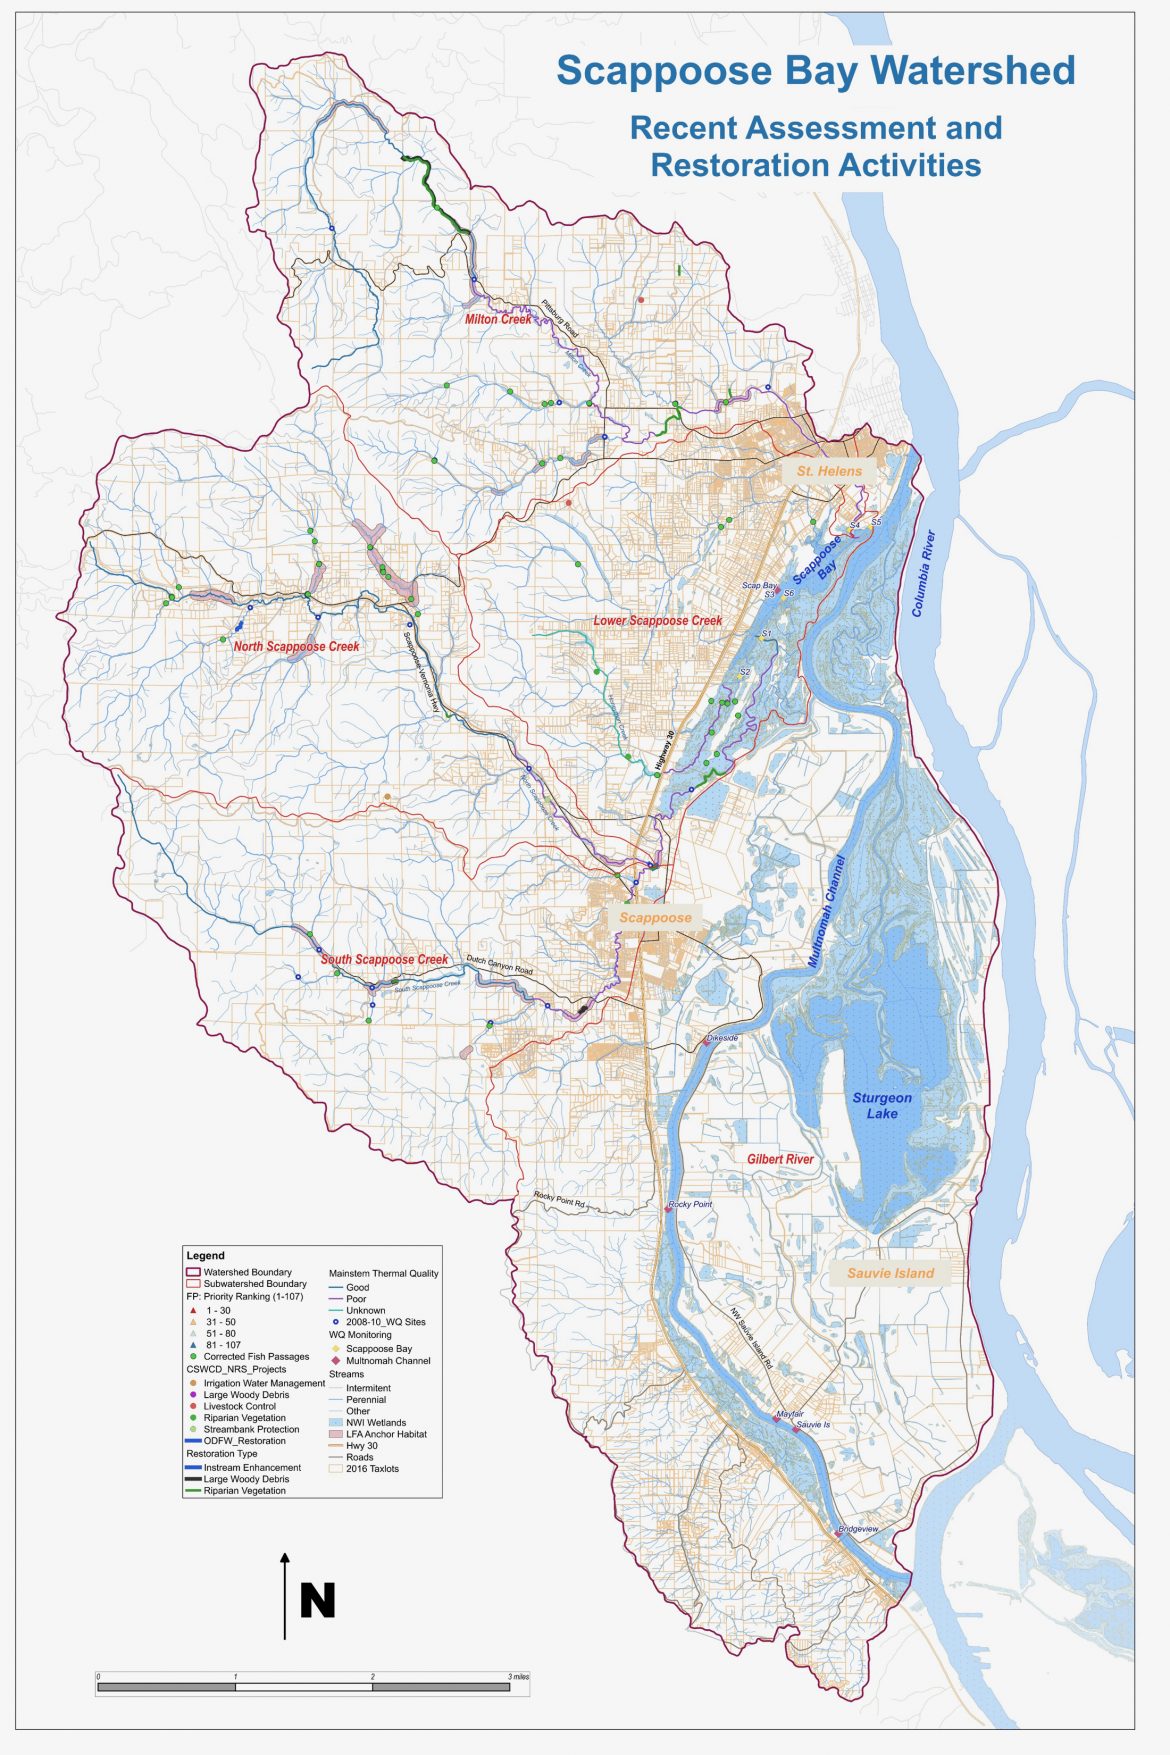 Scappoose_Bay_Watershed_2018.jpg